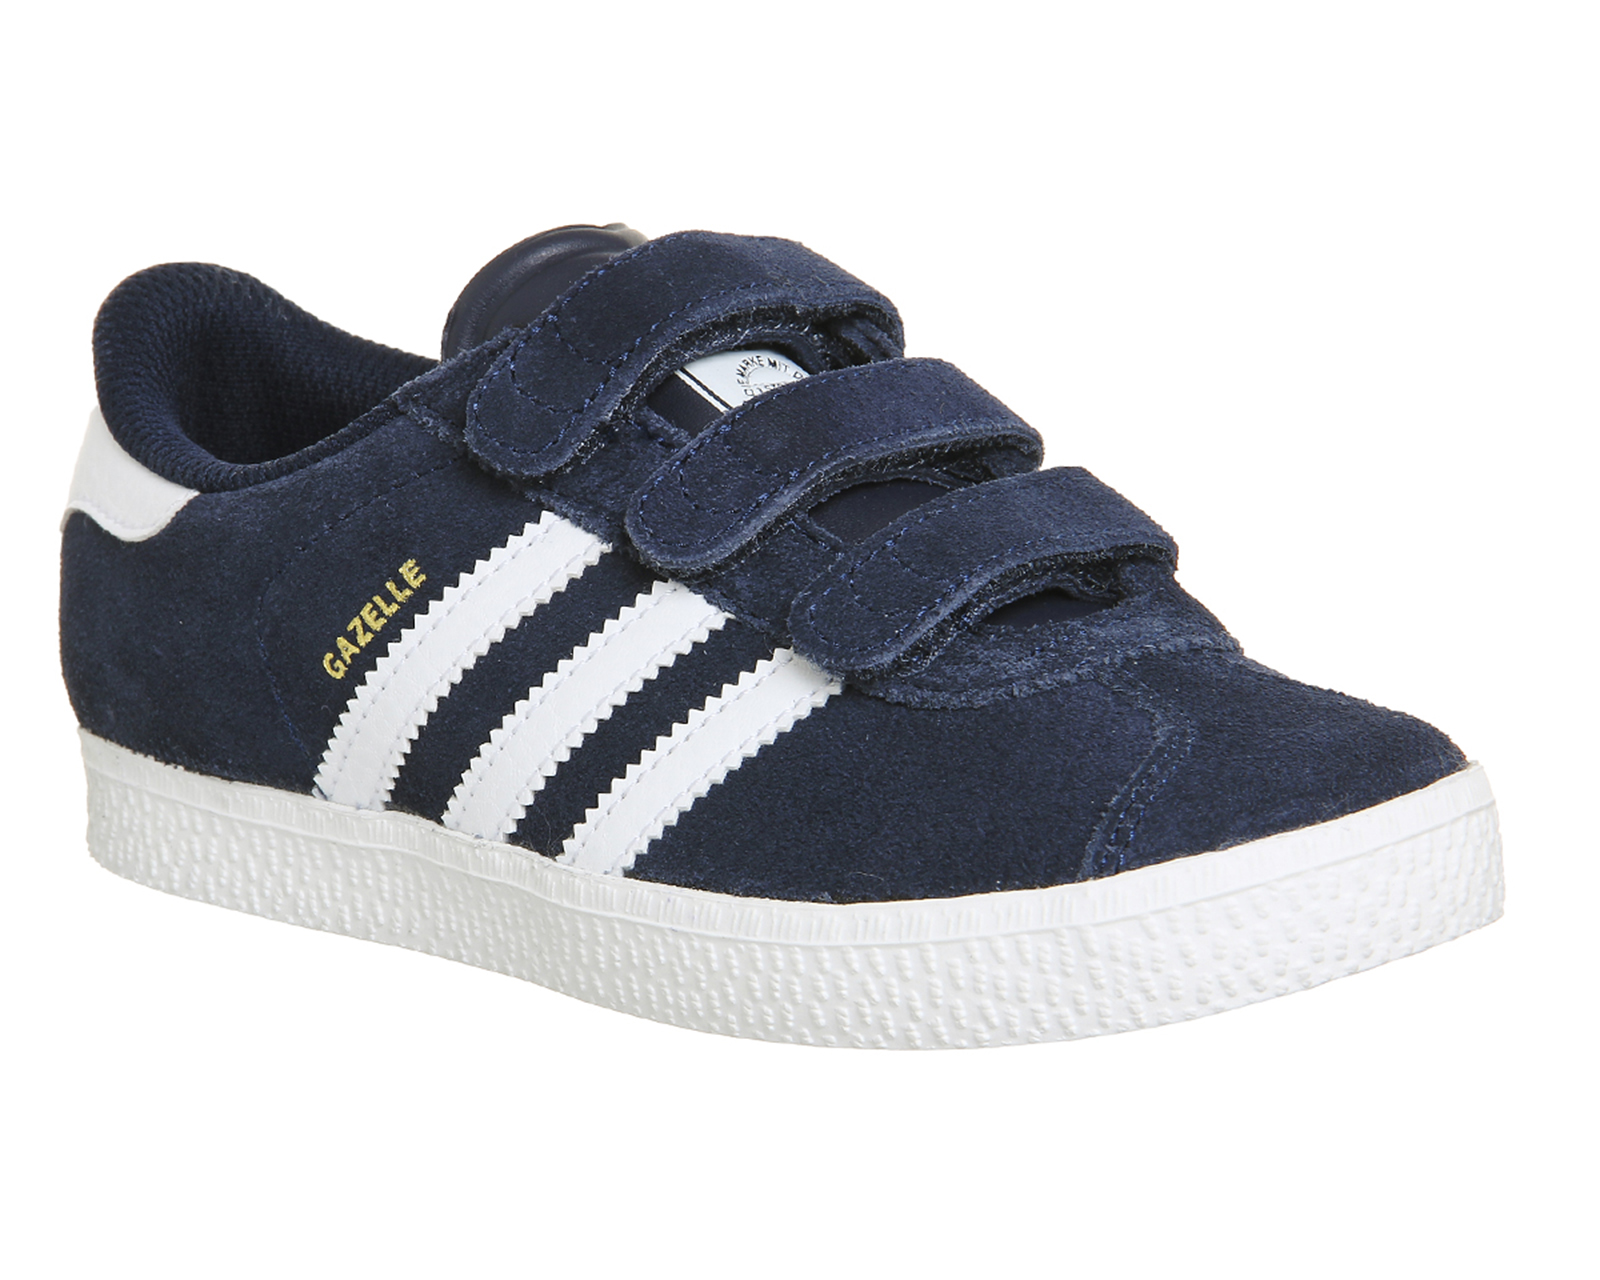 Inspiration toothache Clean the bedroom Adidas Gazelle Childrens Norway, SAVE 49% - aveclumiere.com